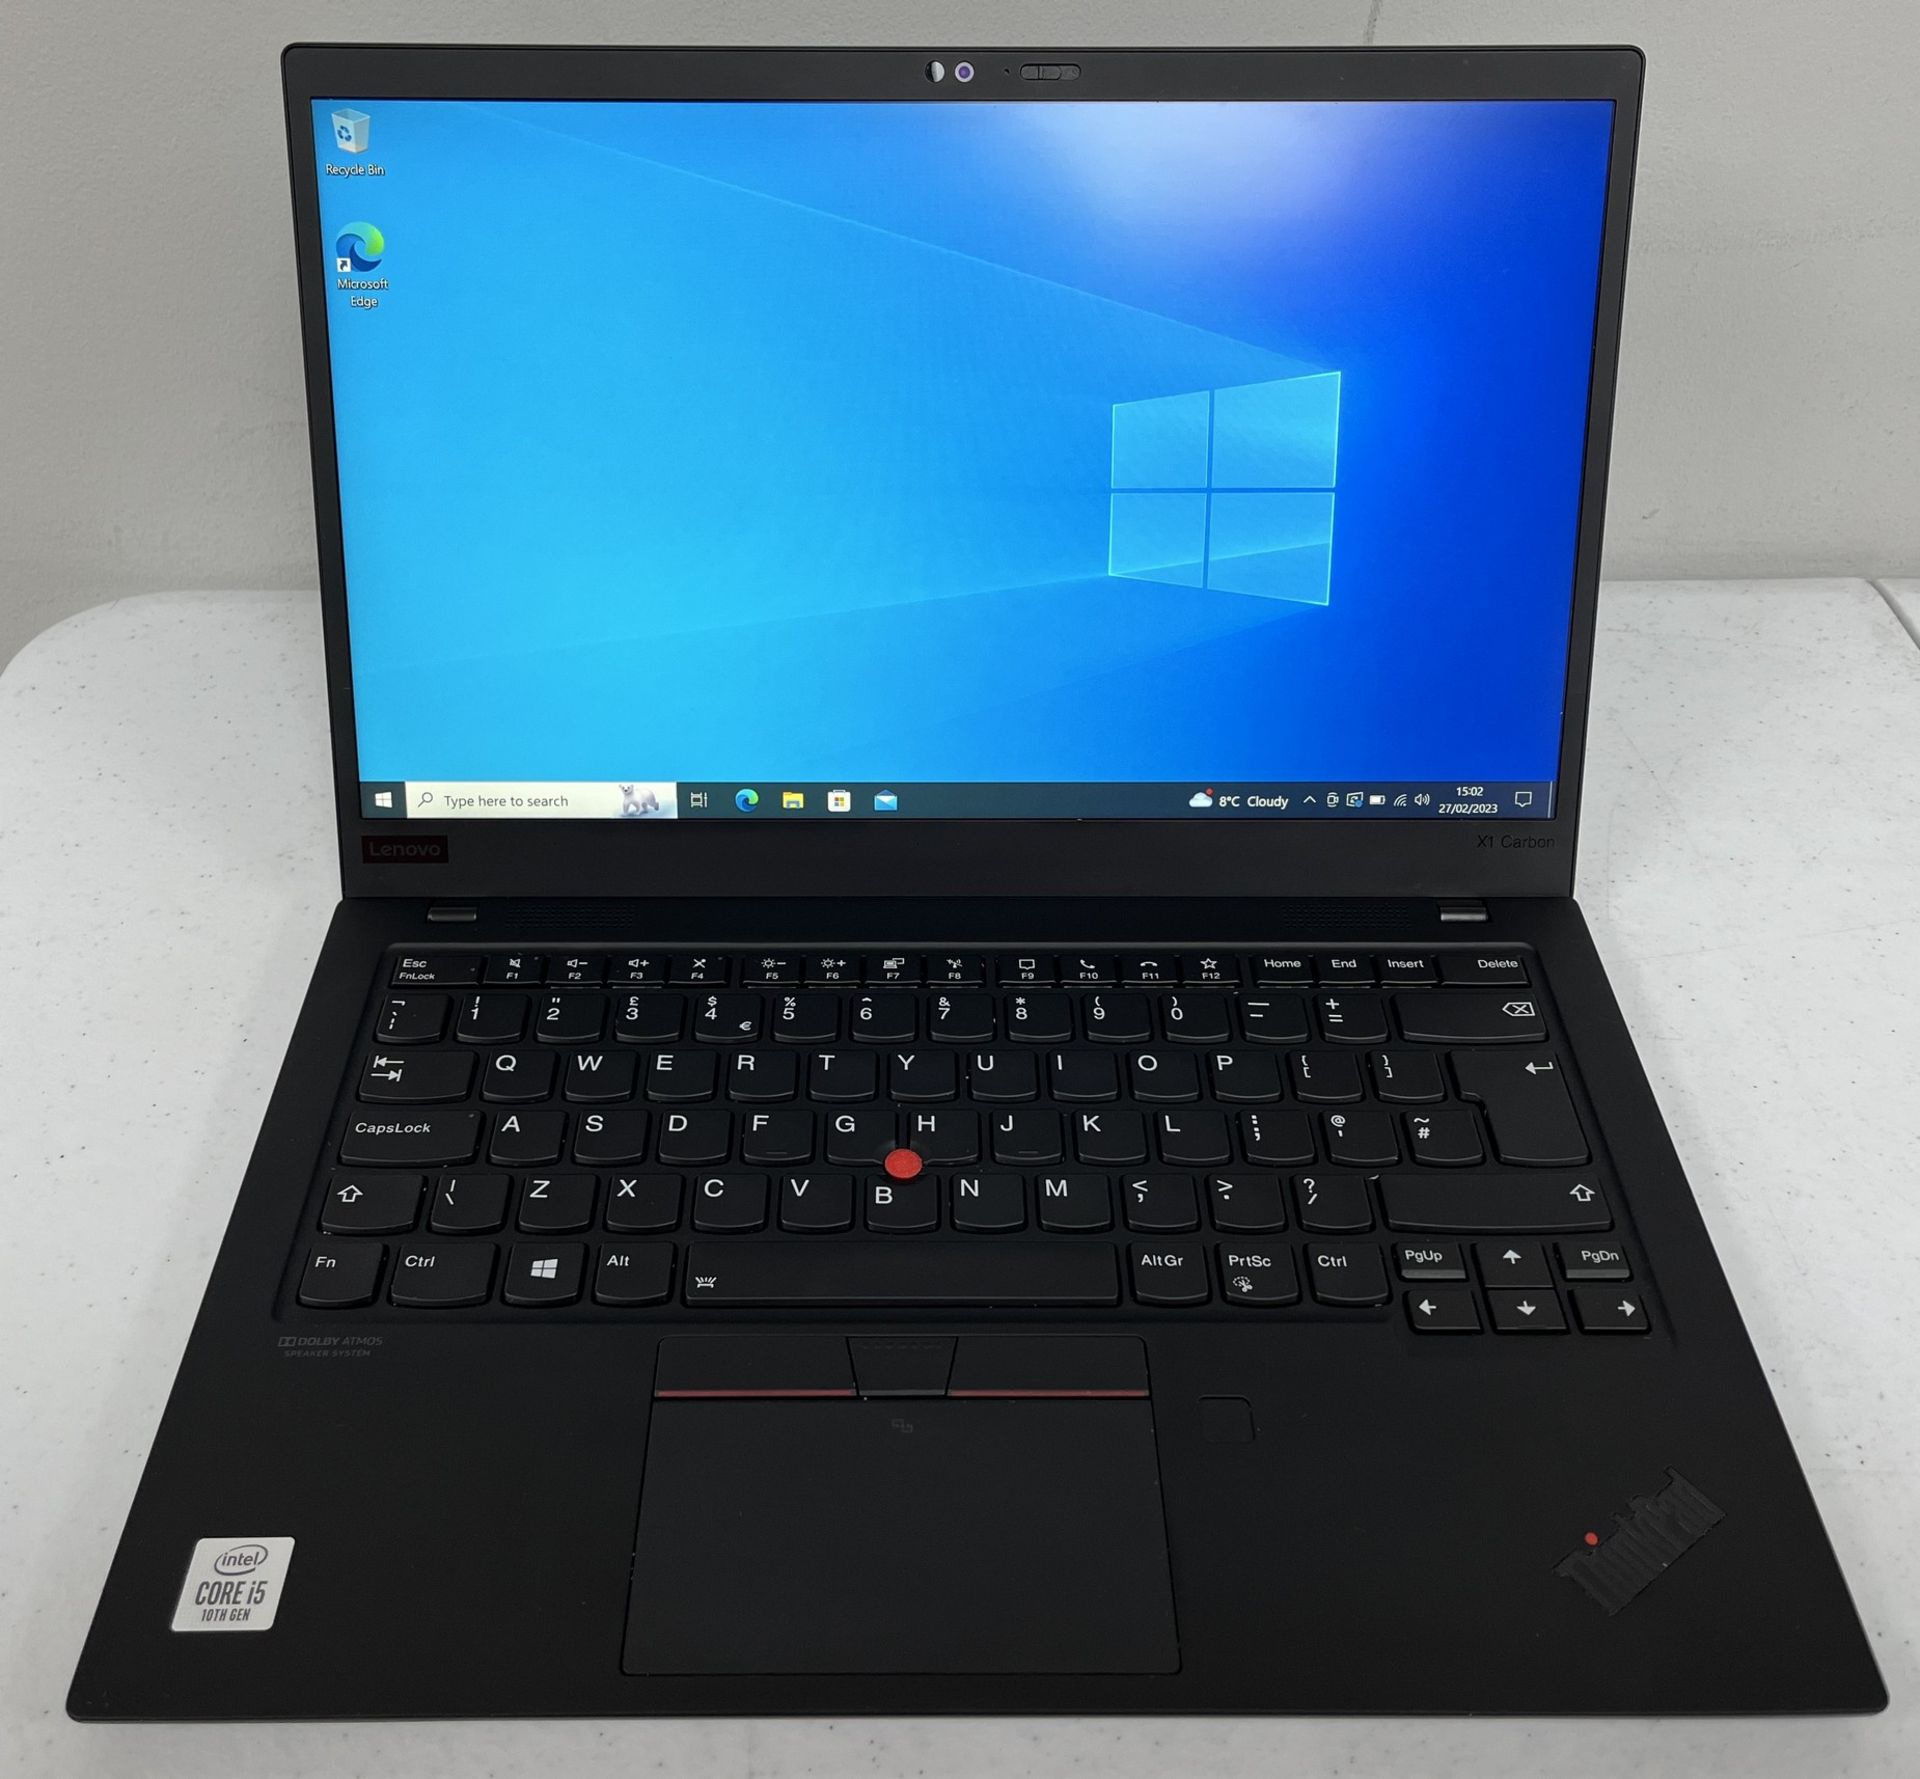 A pre-owned Lenovo ThinkPad X1 Carbon Gen 8 14" Laptop with Intel Core i5-10210U CPU, 16GB RAM, 512G